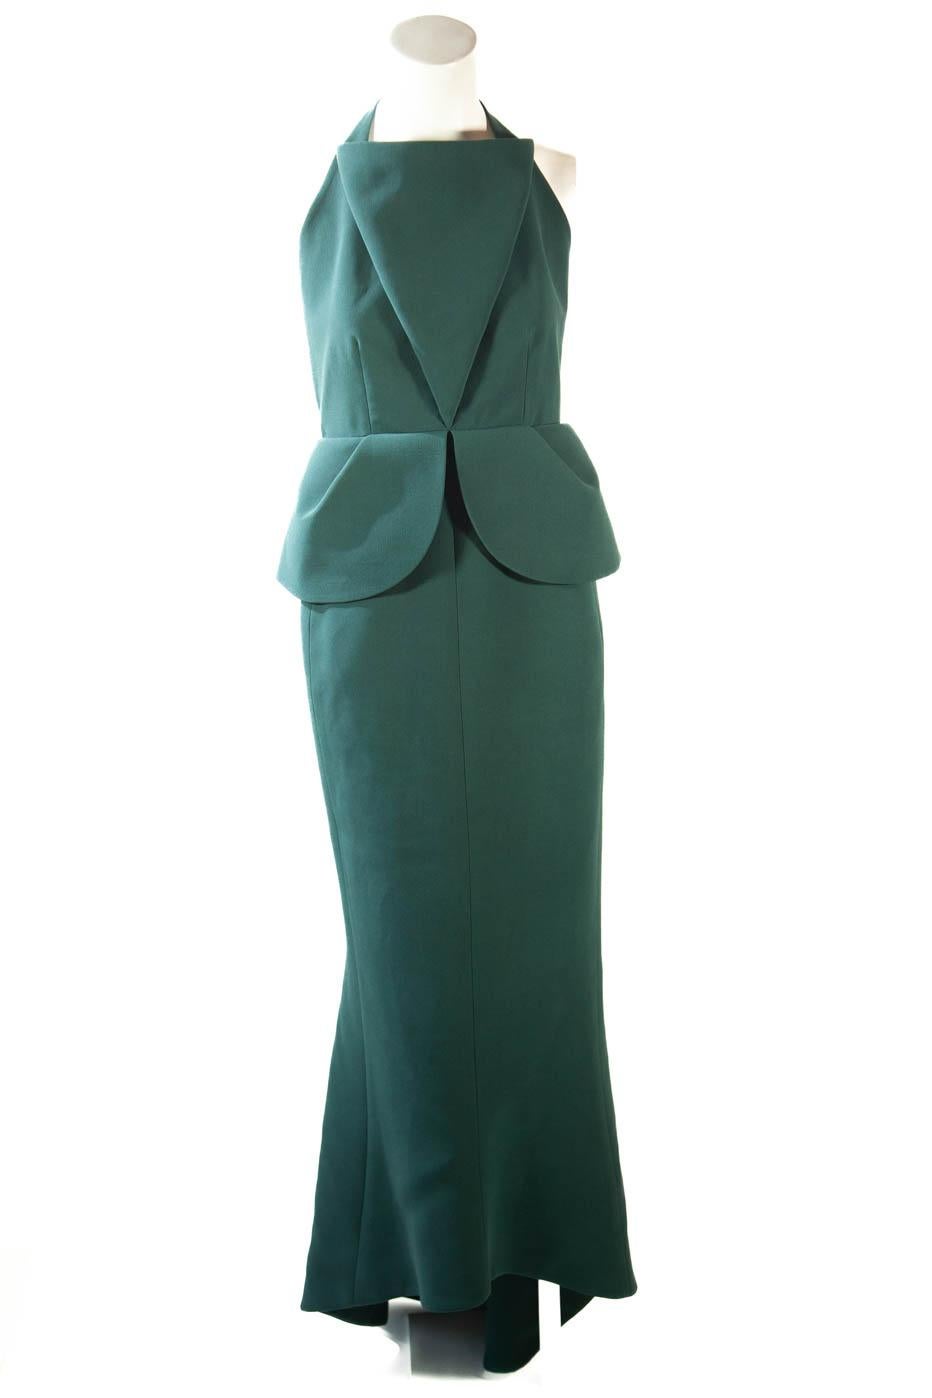 Balenciaga, 2013 Met Gala forest green, gown worn by celebrity (please inquire).

Provenance, please inquire.

